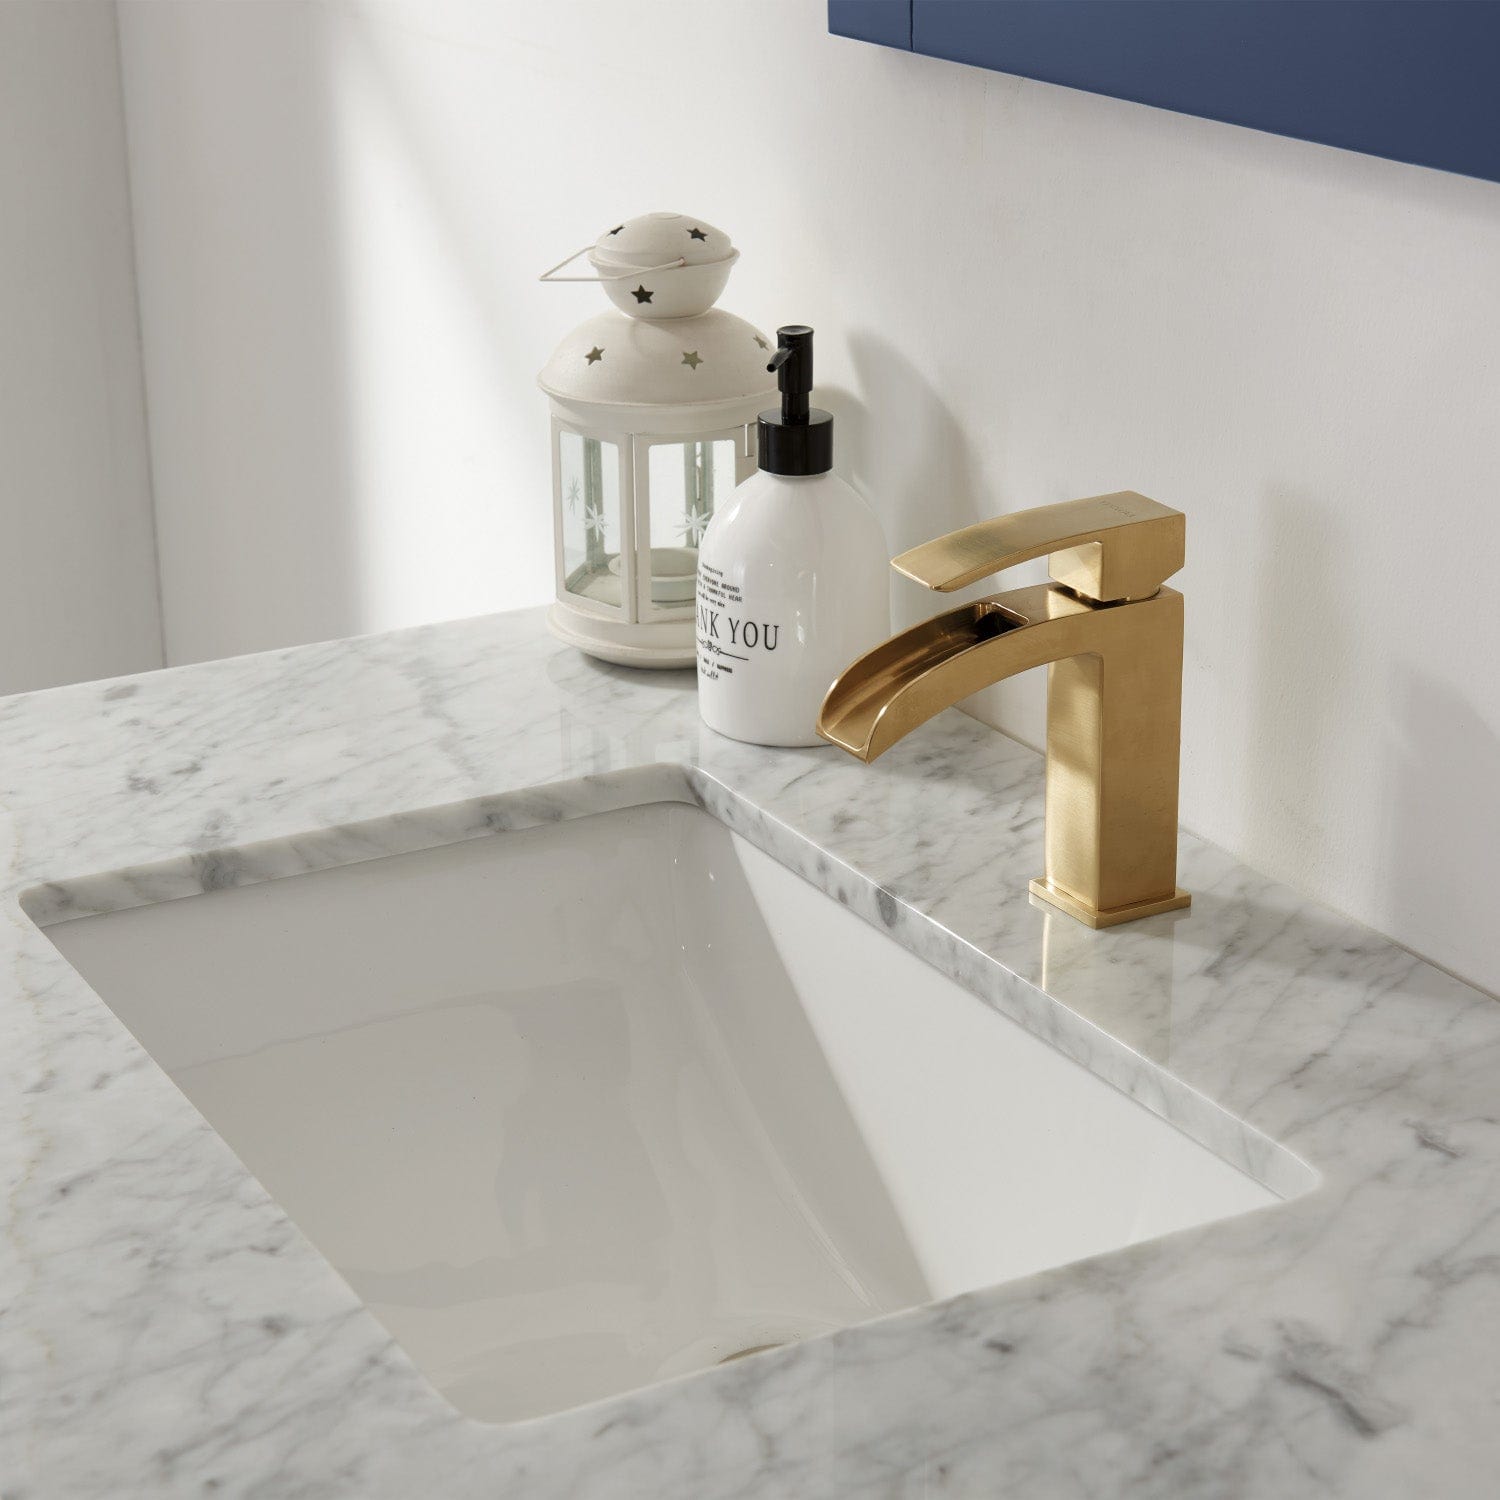 Altair Remi 36" Single Bathroom Vanity Set in Royal Blue and Carrara White Marble Countertop without Mirror 532036-RB-CA-NM - Molaix631112971423Vanity532036-RB-CA-NM